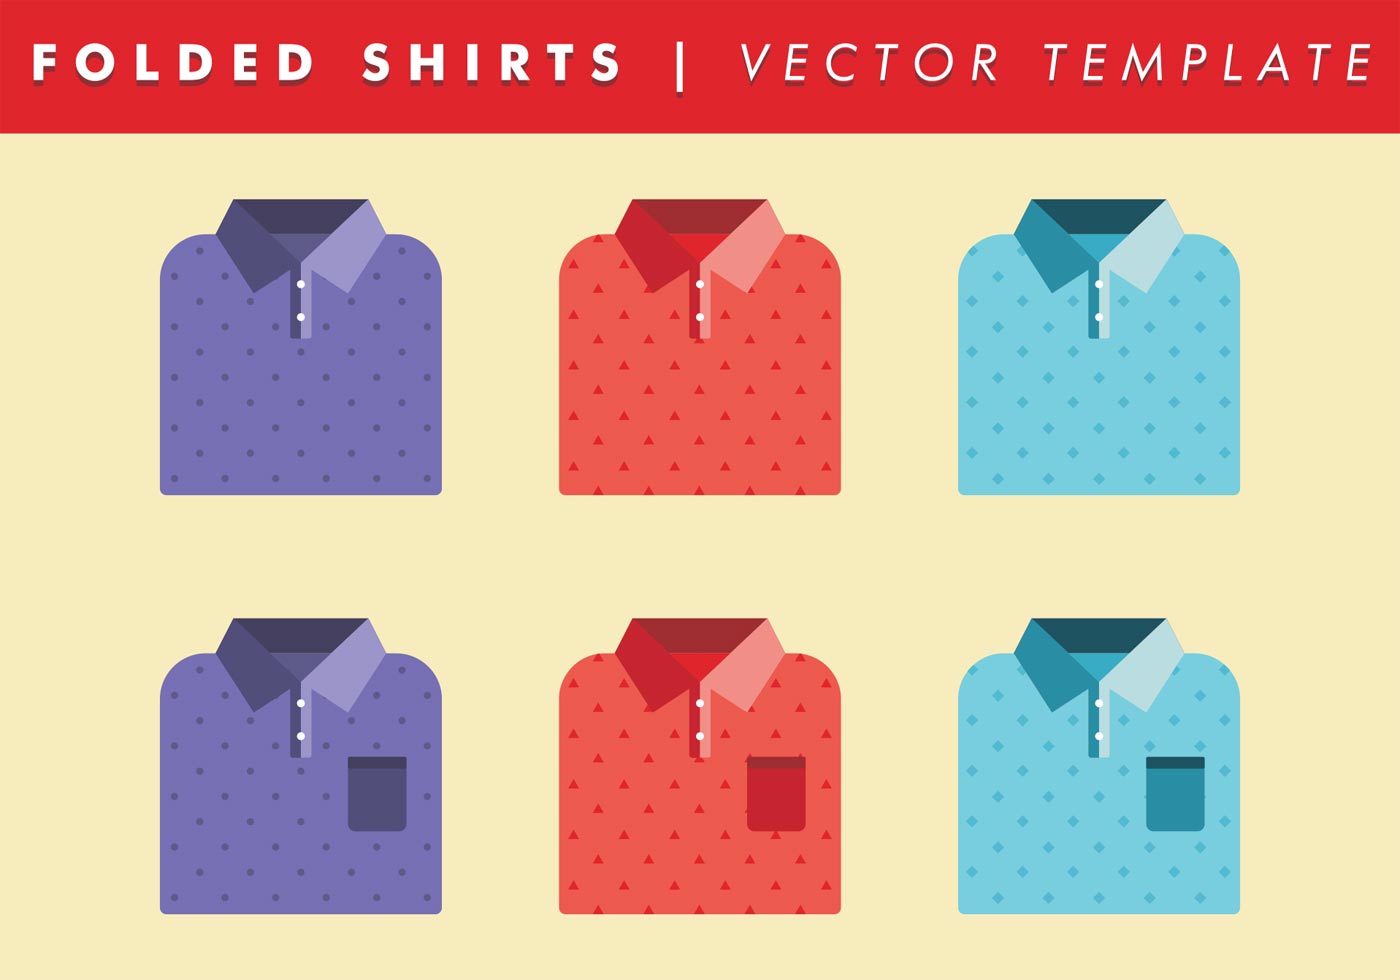 Download Folded Shirts Template Vector Free - Download Free Vectors ...